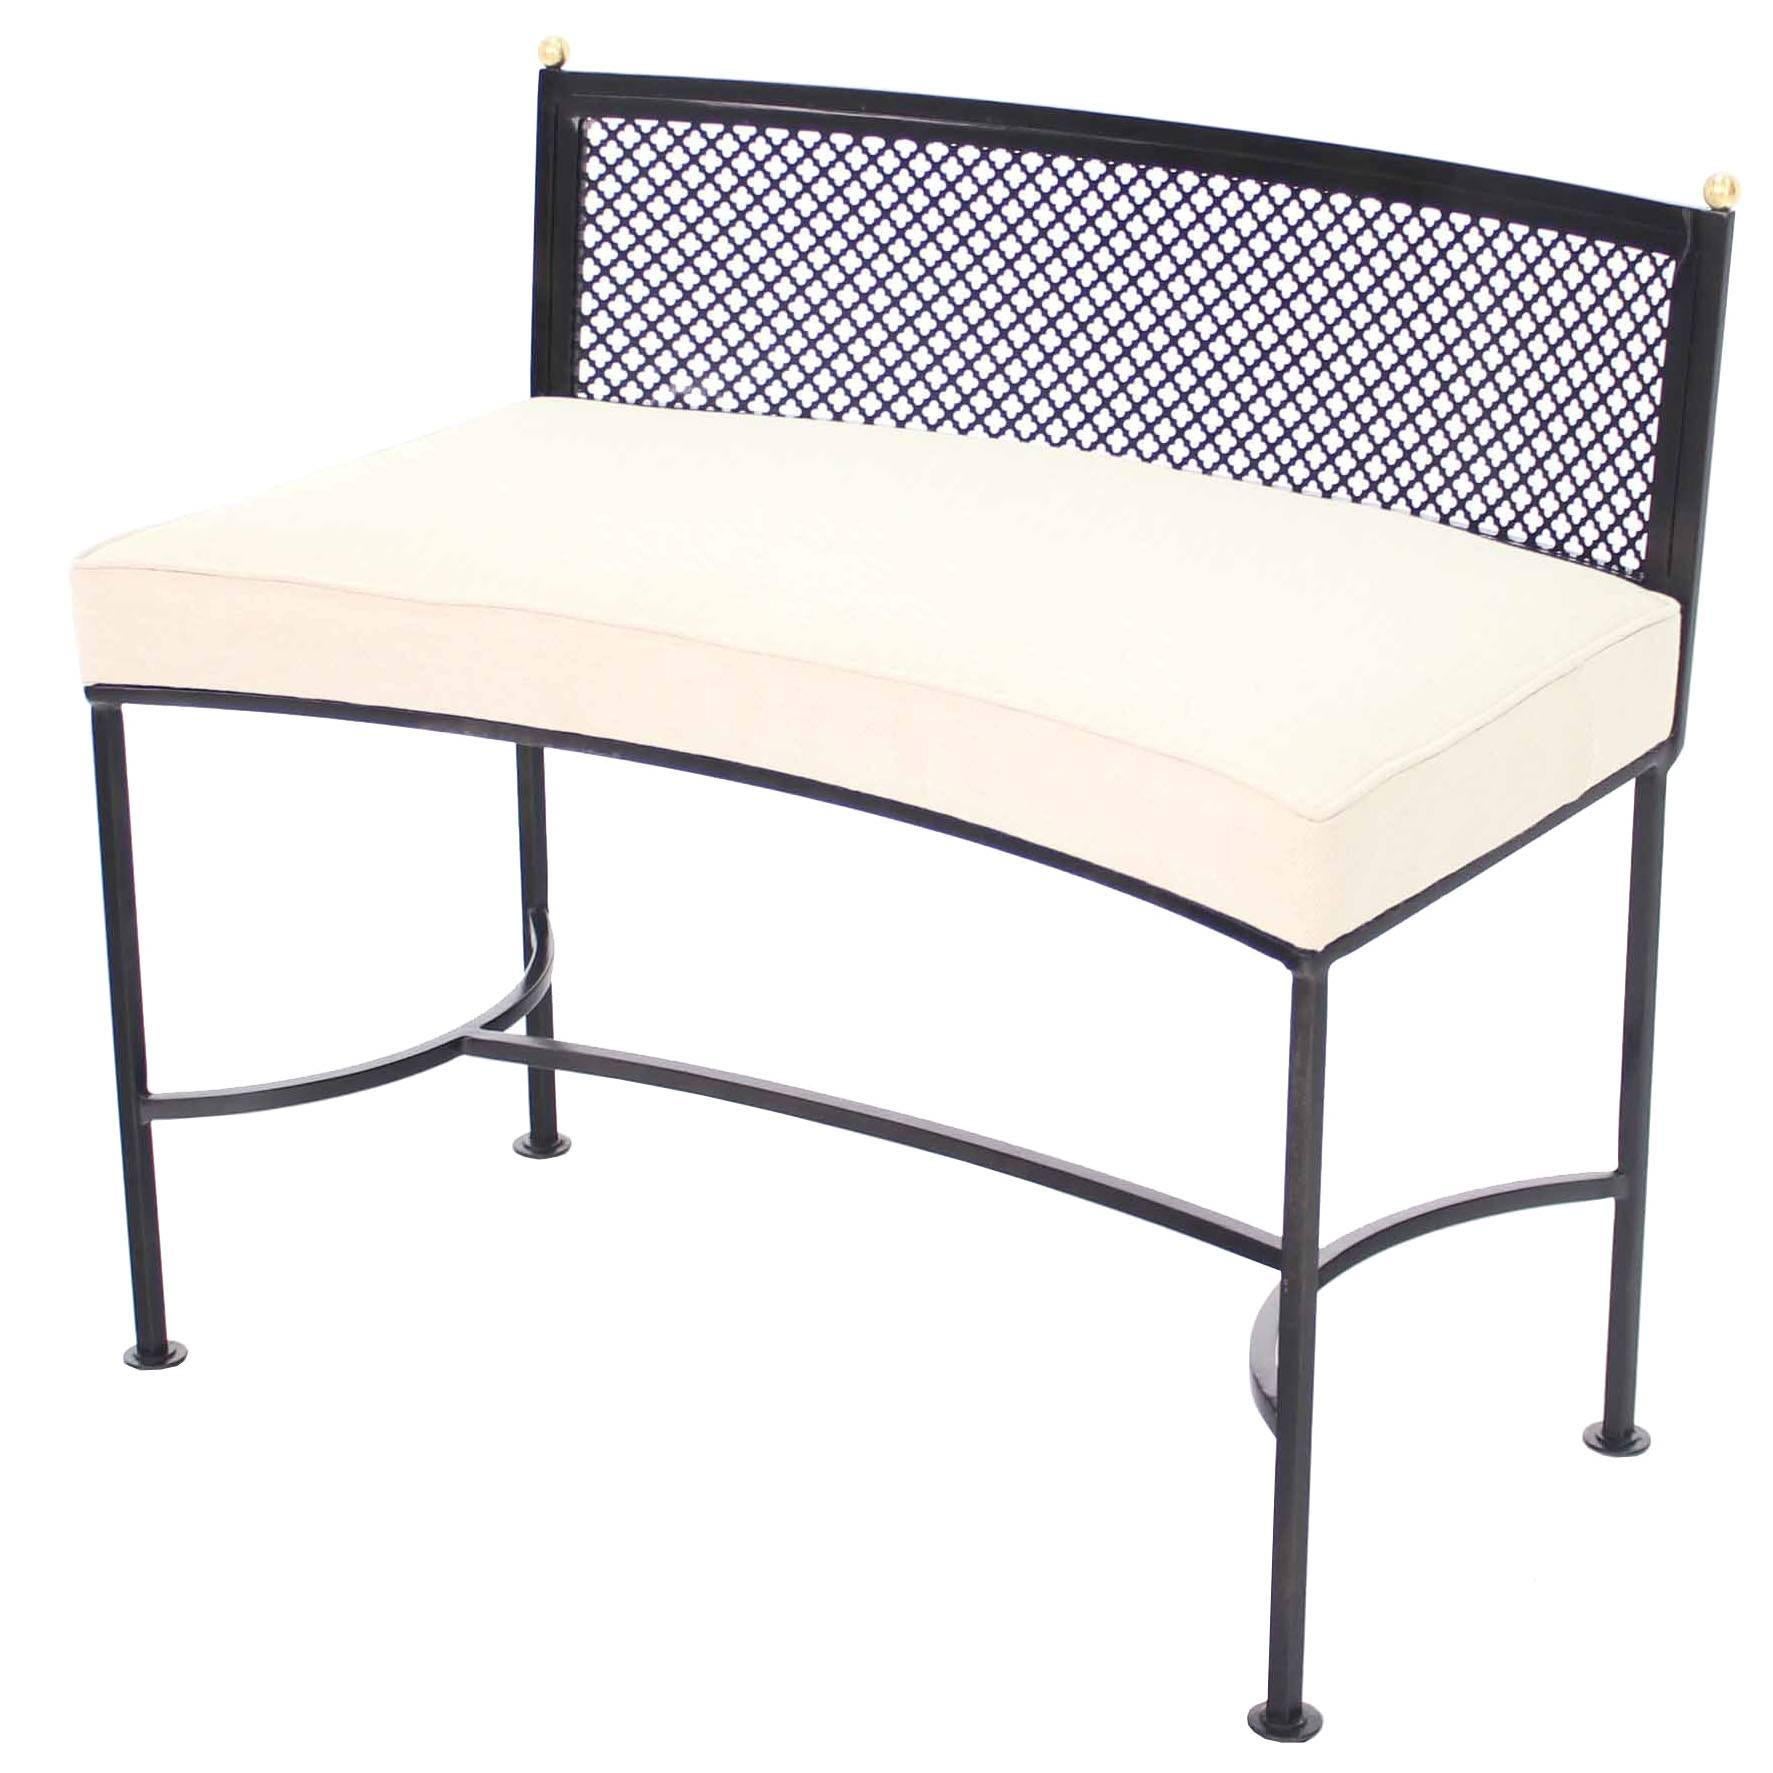 Wrought Iron Curved Bench New Upholstery